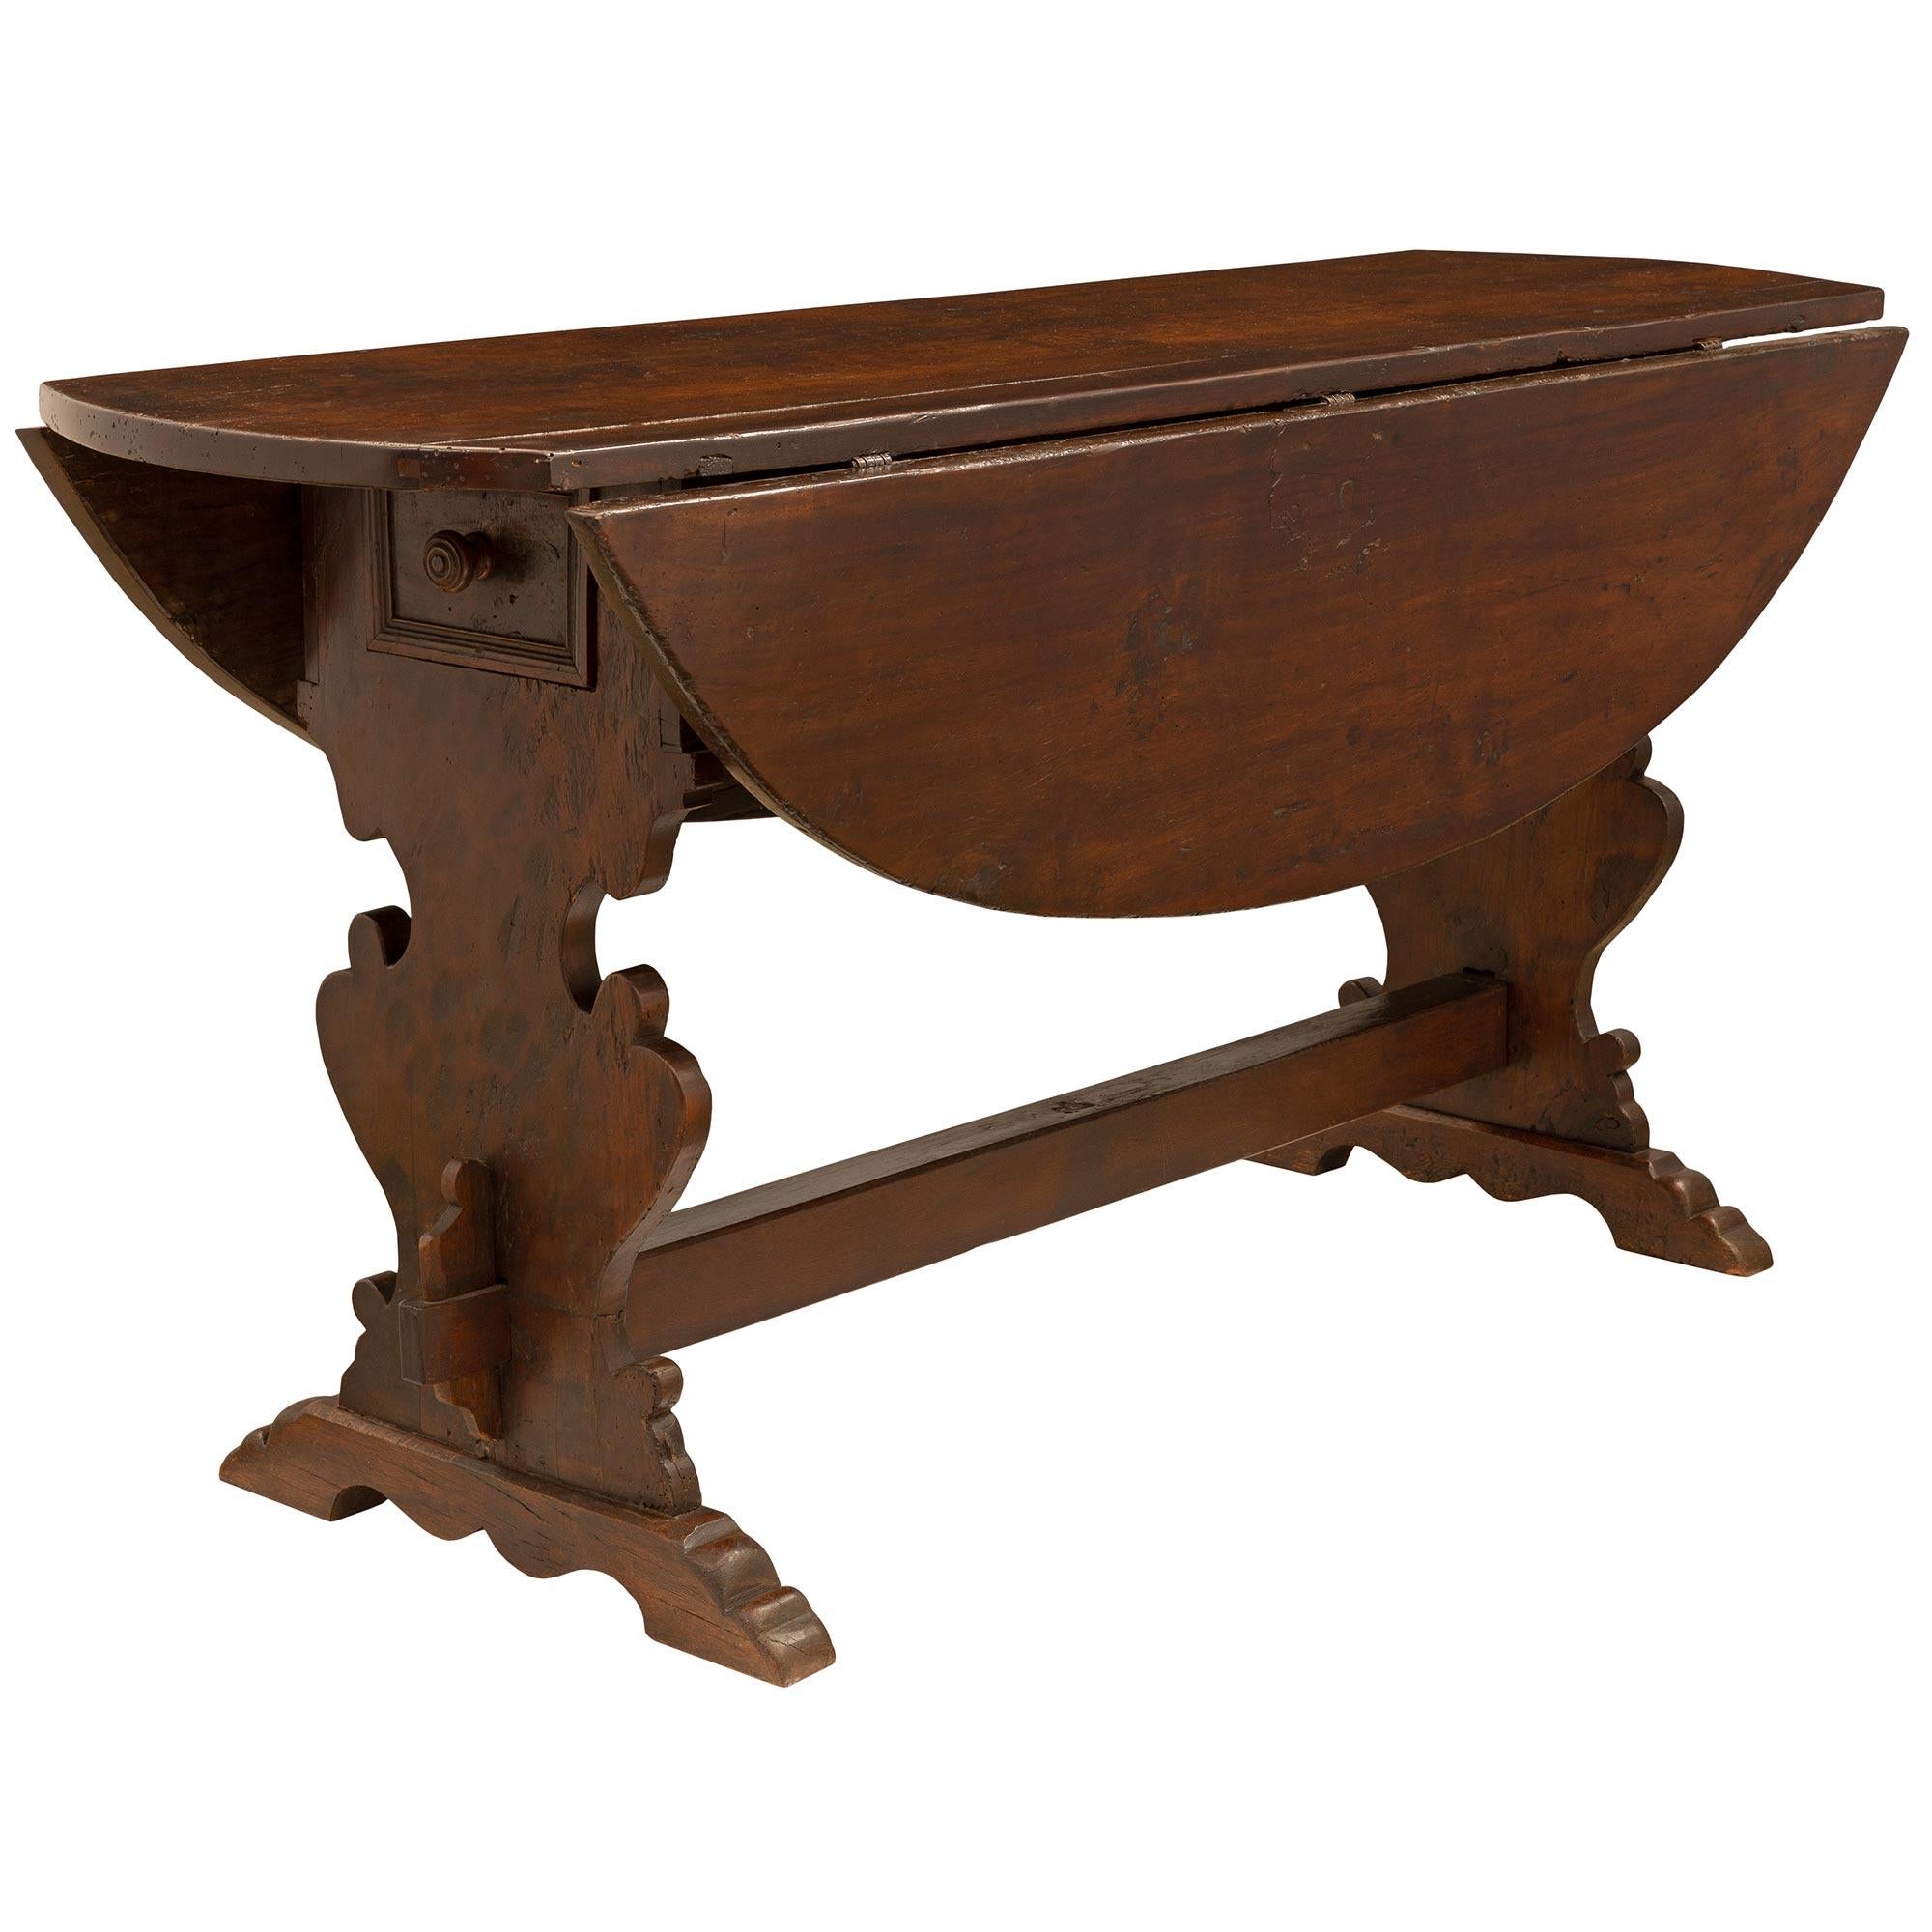 18th Century and Earlier Italian 18th Century Solid Walnut Gateleg Table from Tuscany For Sale